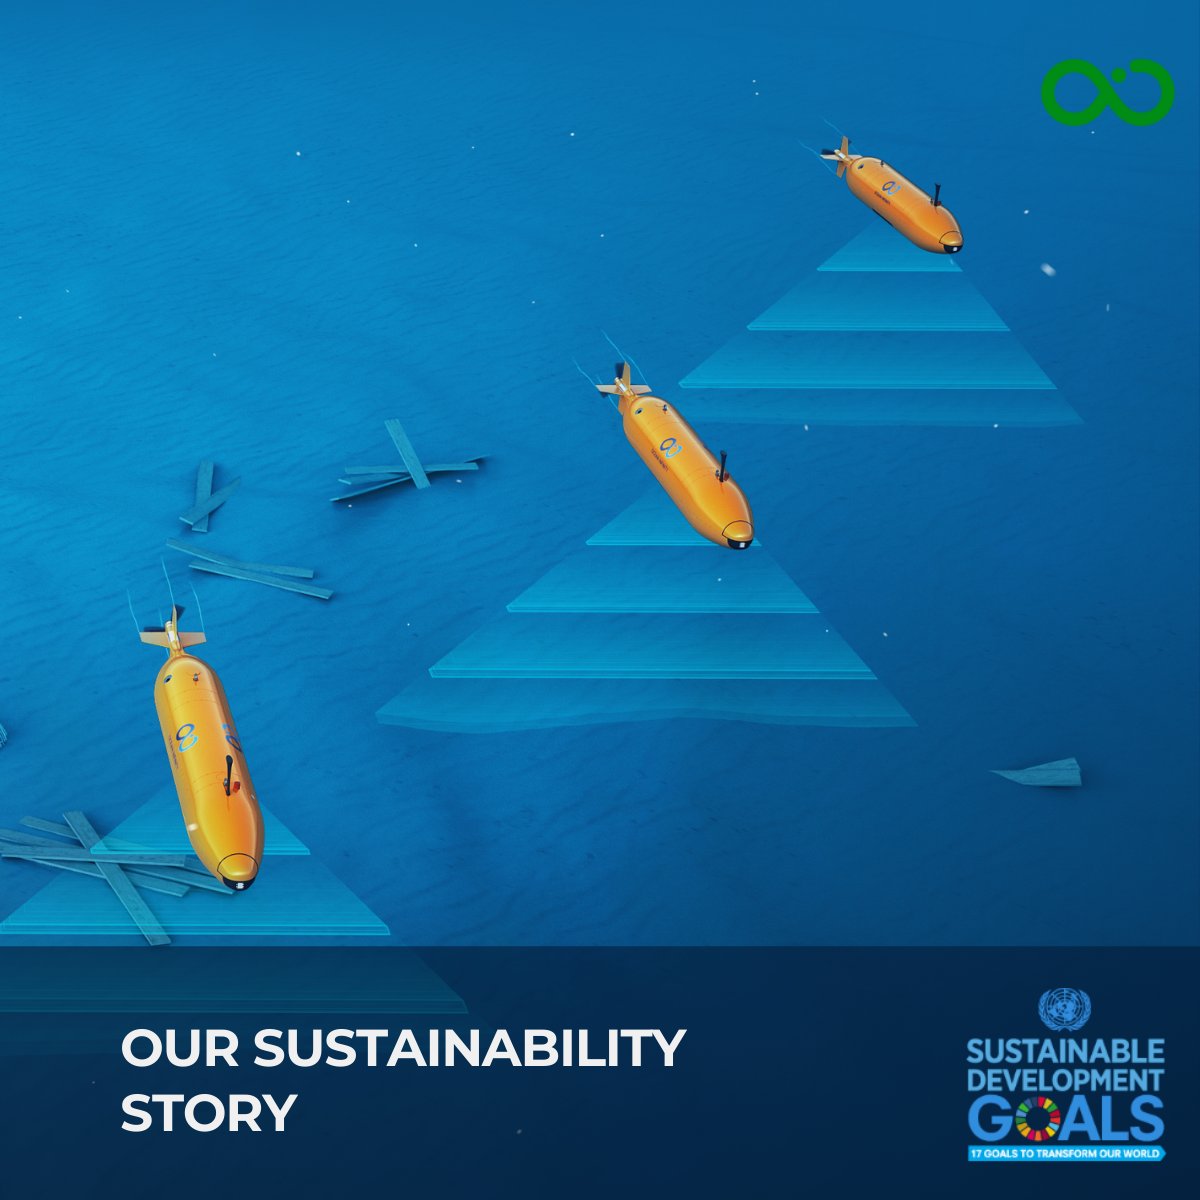 1/3 Ocean Infinity was born out of an idea to challenge conventional operations in the maritime industry. This idea turned out to be the seed that our mission was born out of: to use innovative technology to transform operations at sea, to enable people and the planet to thrive.